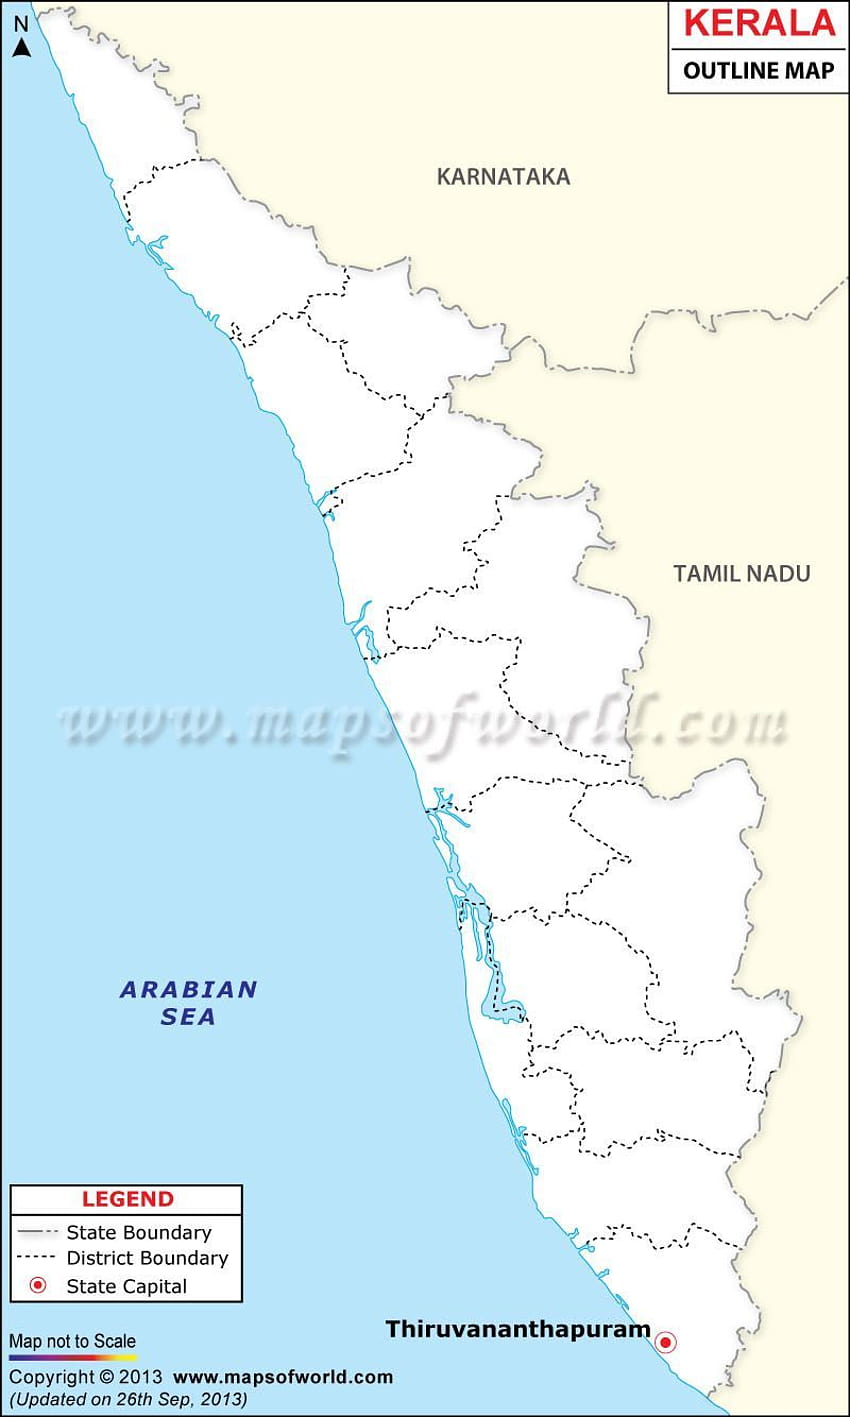 Map  kerala india Map of kerala a province of india  CanStock